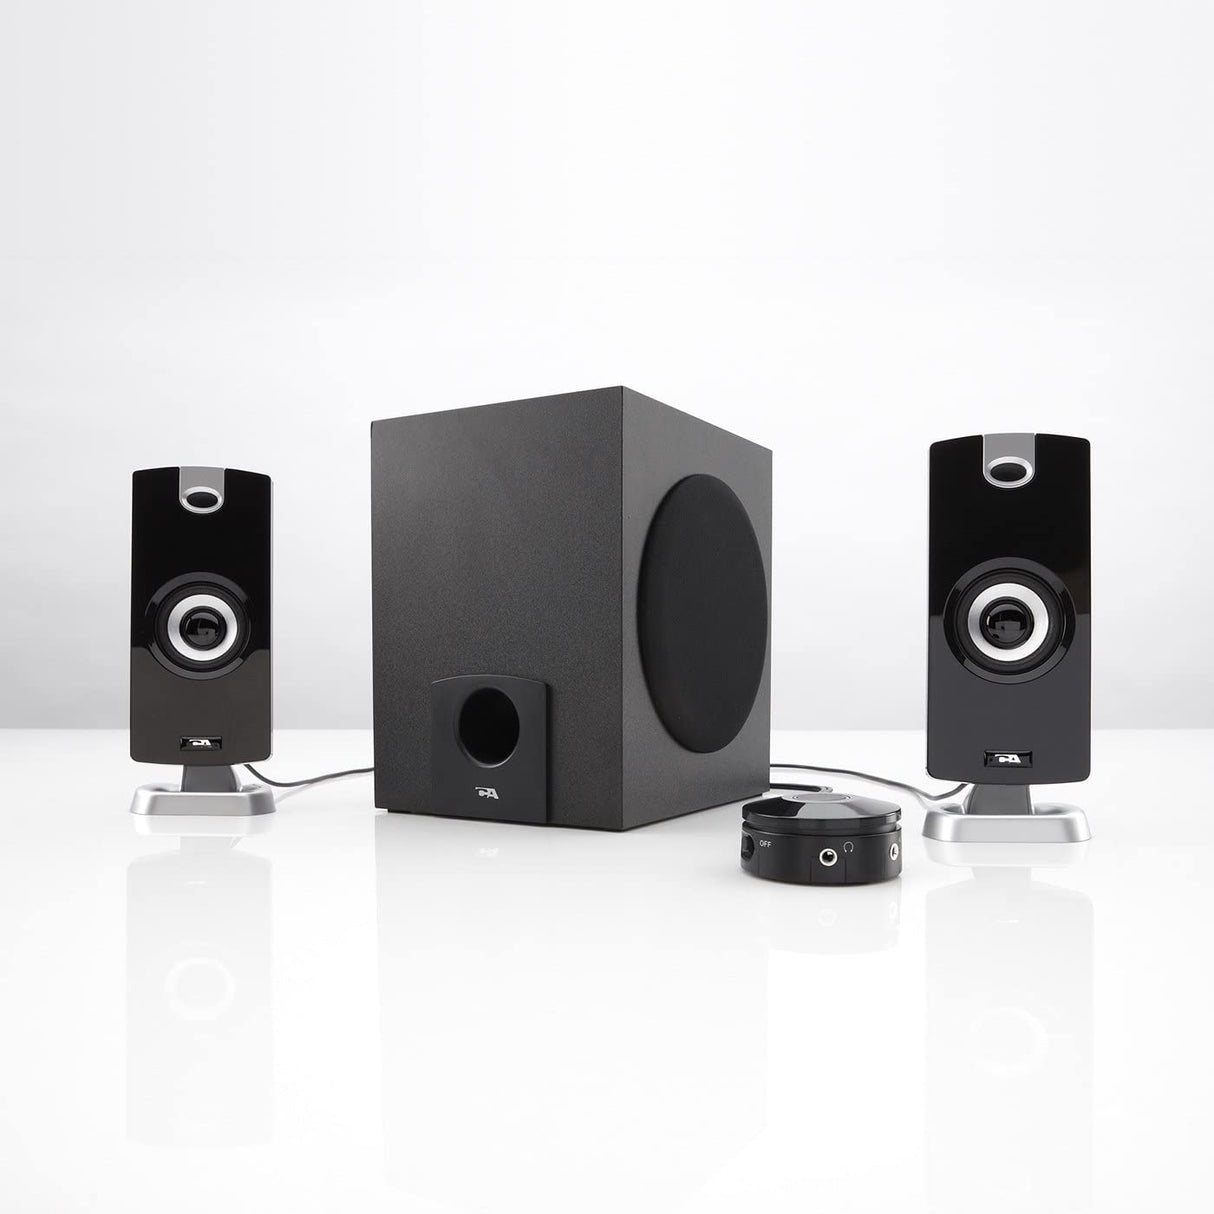 Cyber Acoustics 2.1 Subwoofer Speaker System with 18W of Power – Great for Music, Movies, Gaming, and Multimedia Computer Laptops (CA-3090) Green